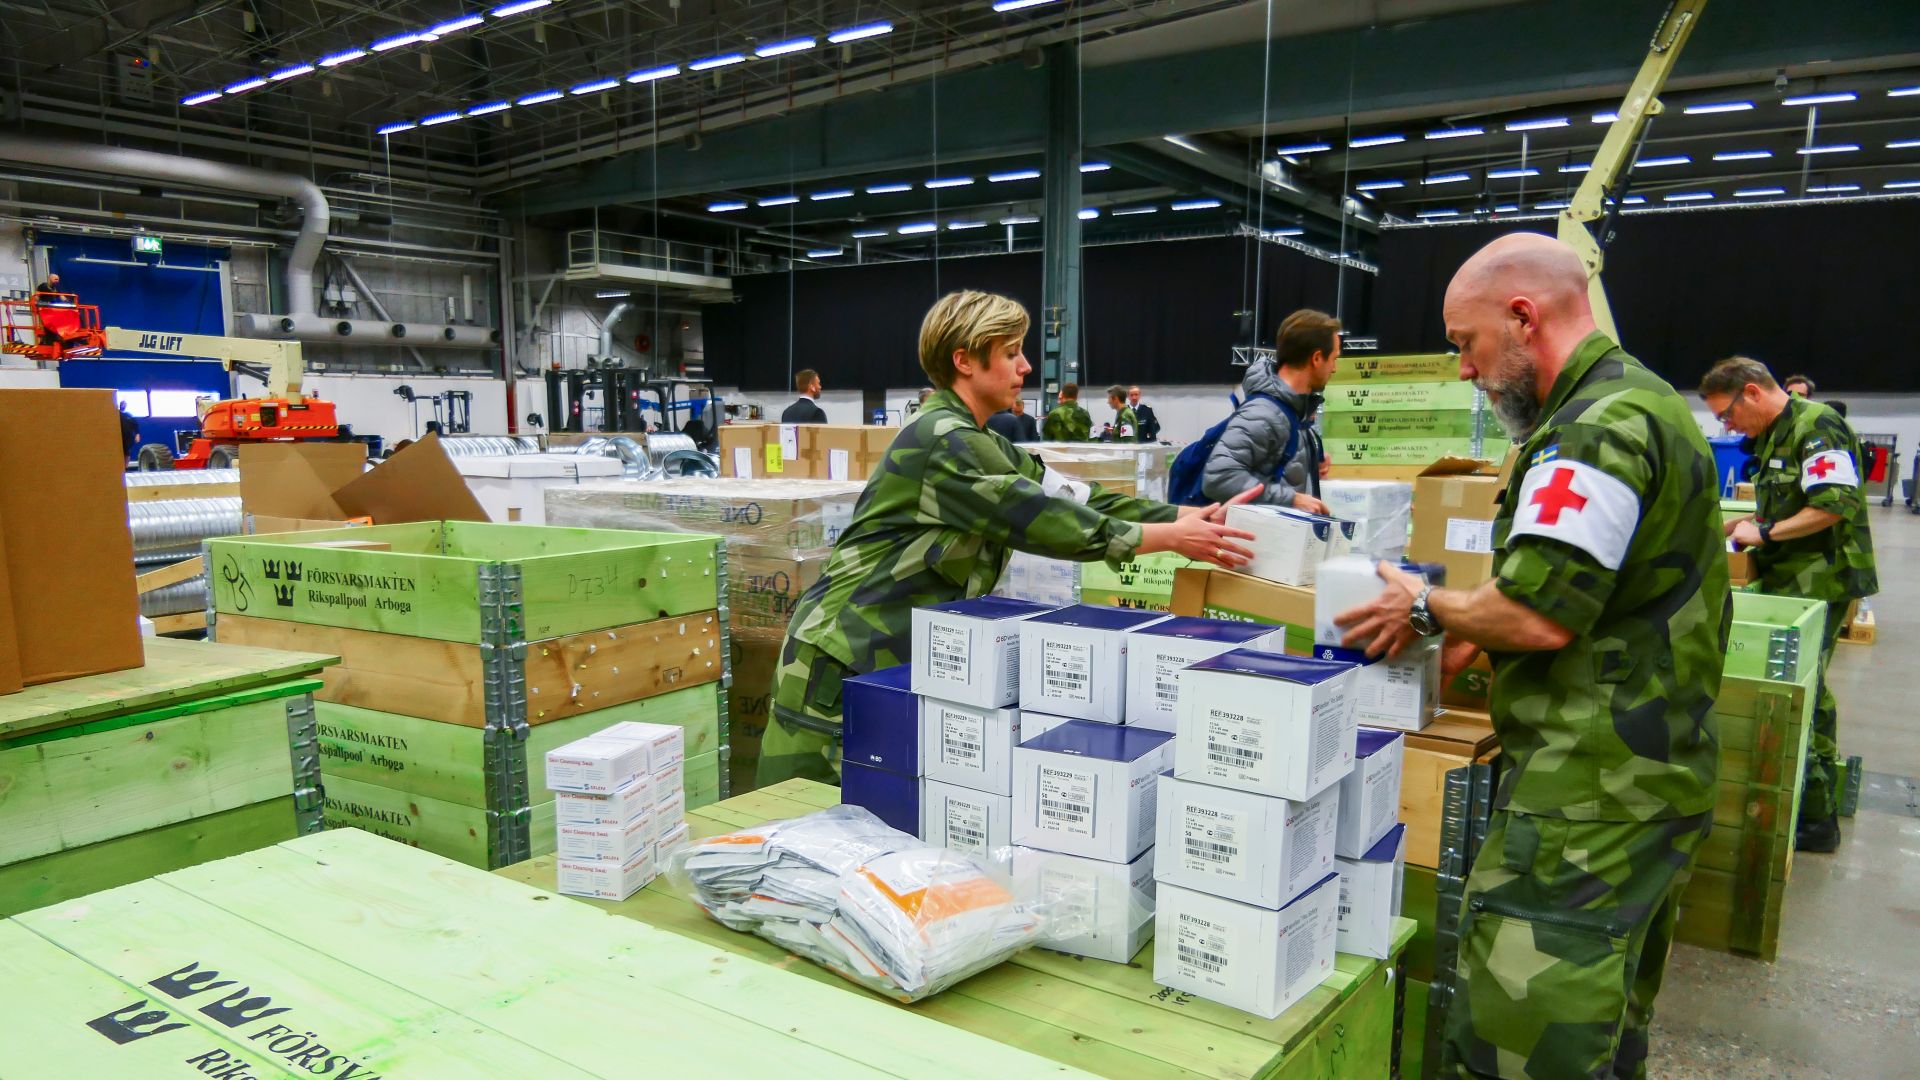 Army medical workers unpacking emergency supplies at a field hospital in Sweden